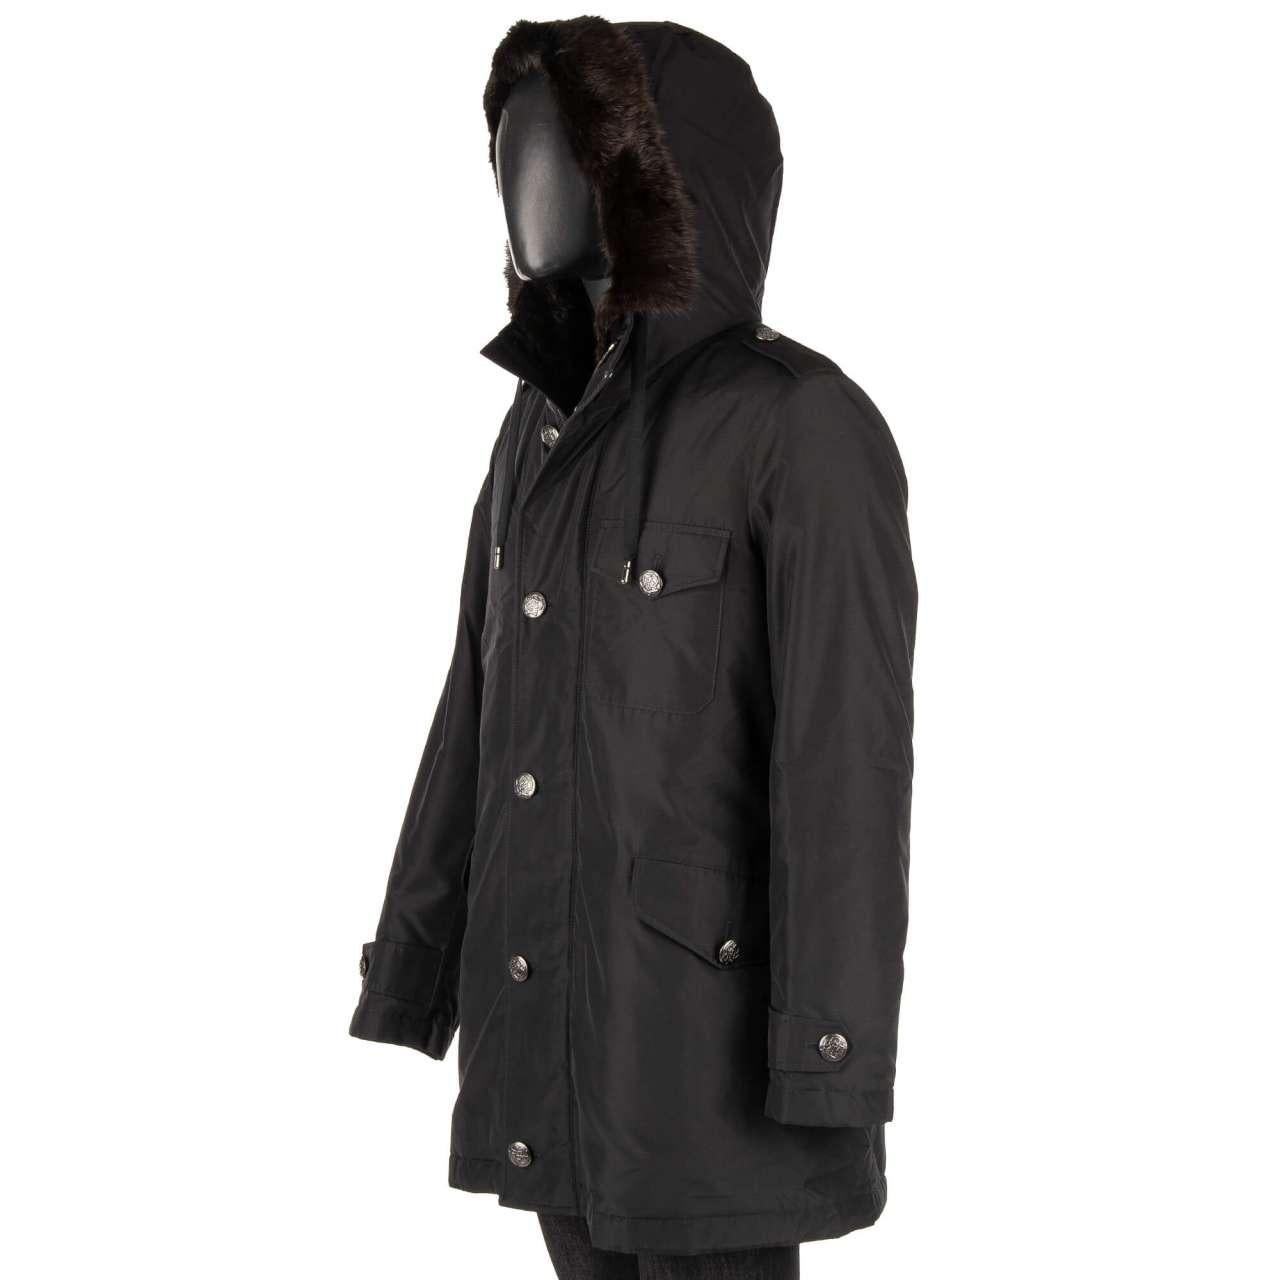 Dolce & Gabbana Silk Parka Jacket with Detachable Fur Lining and Hoody Black 48 For Sale 3